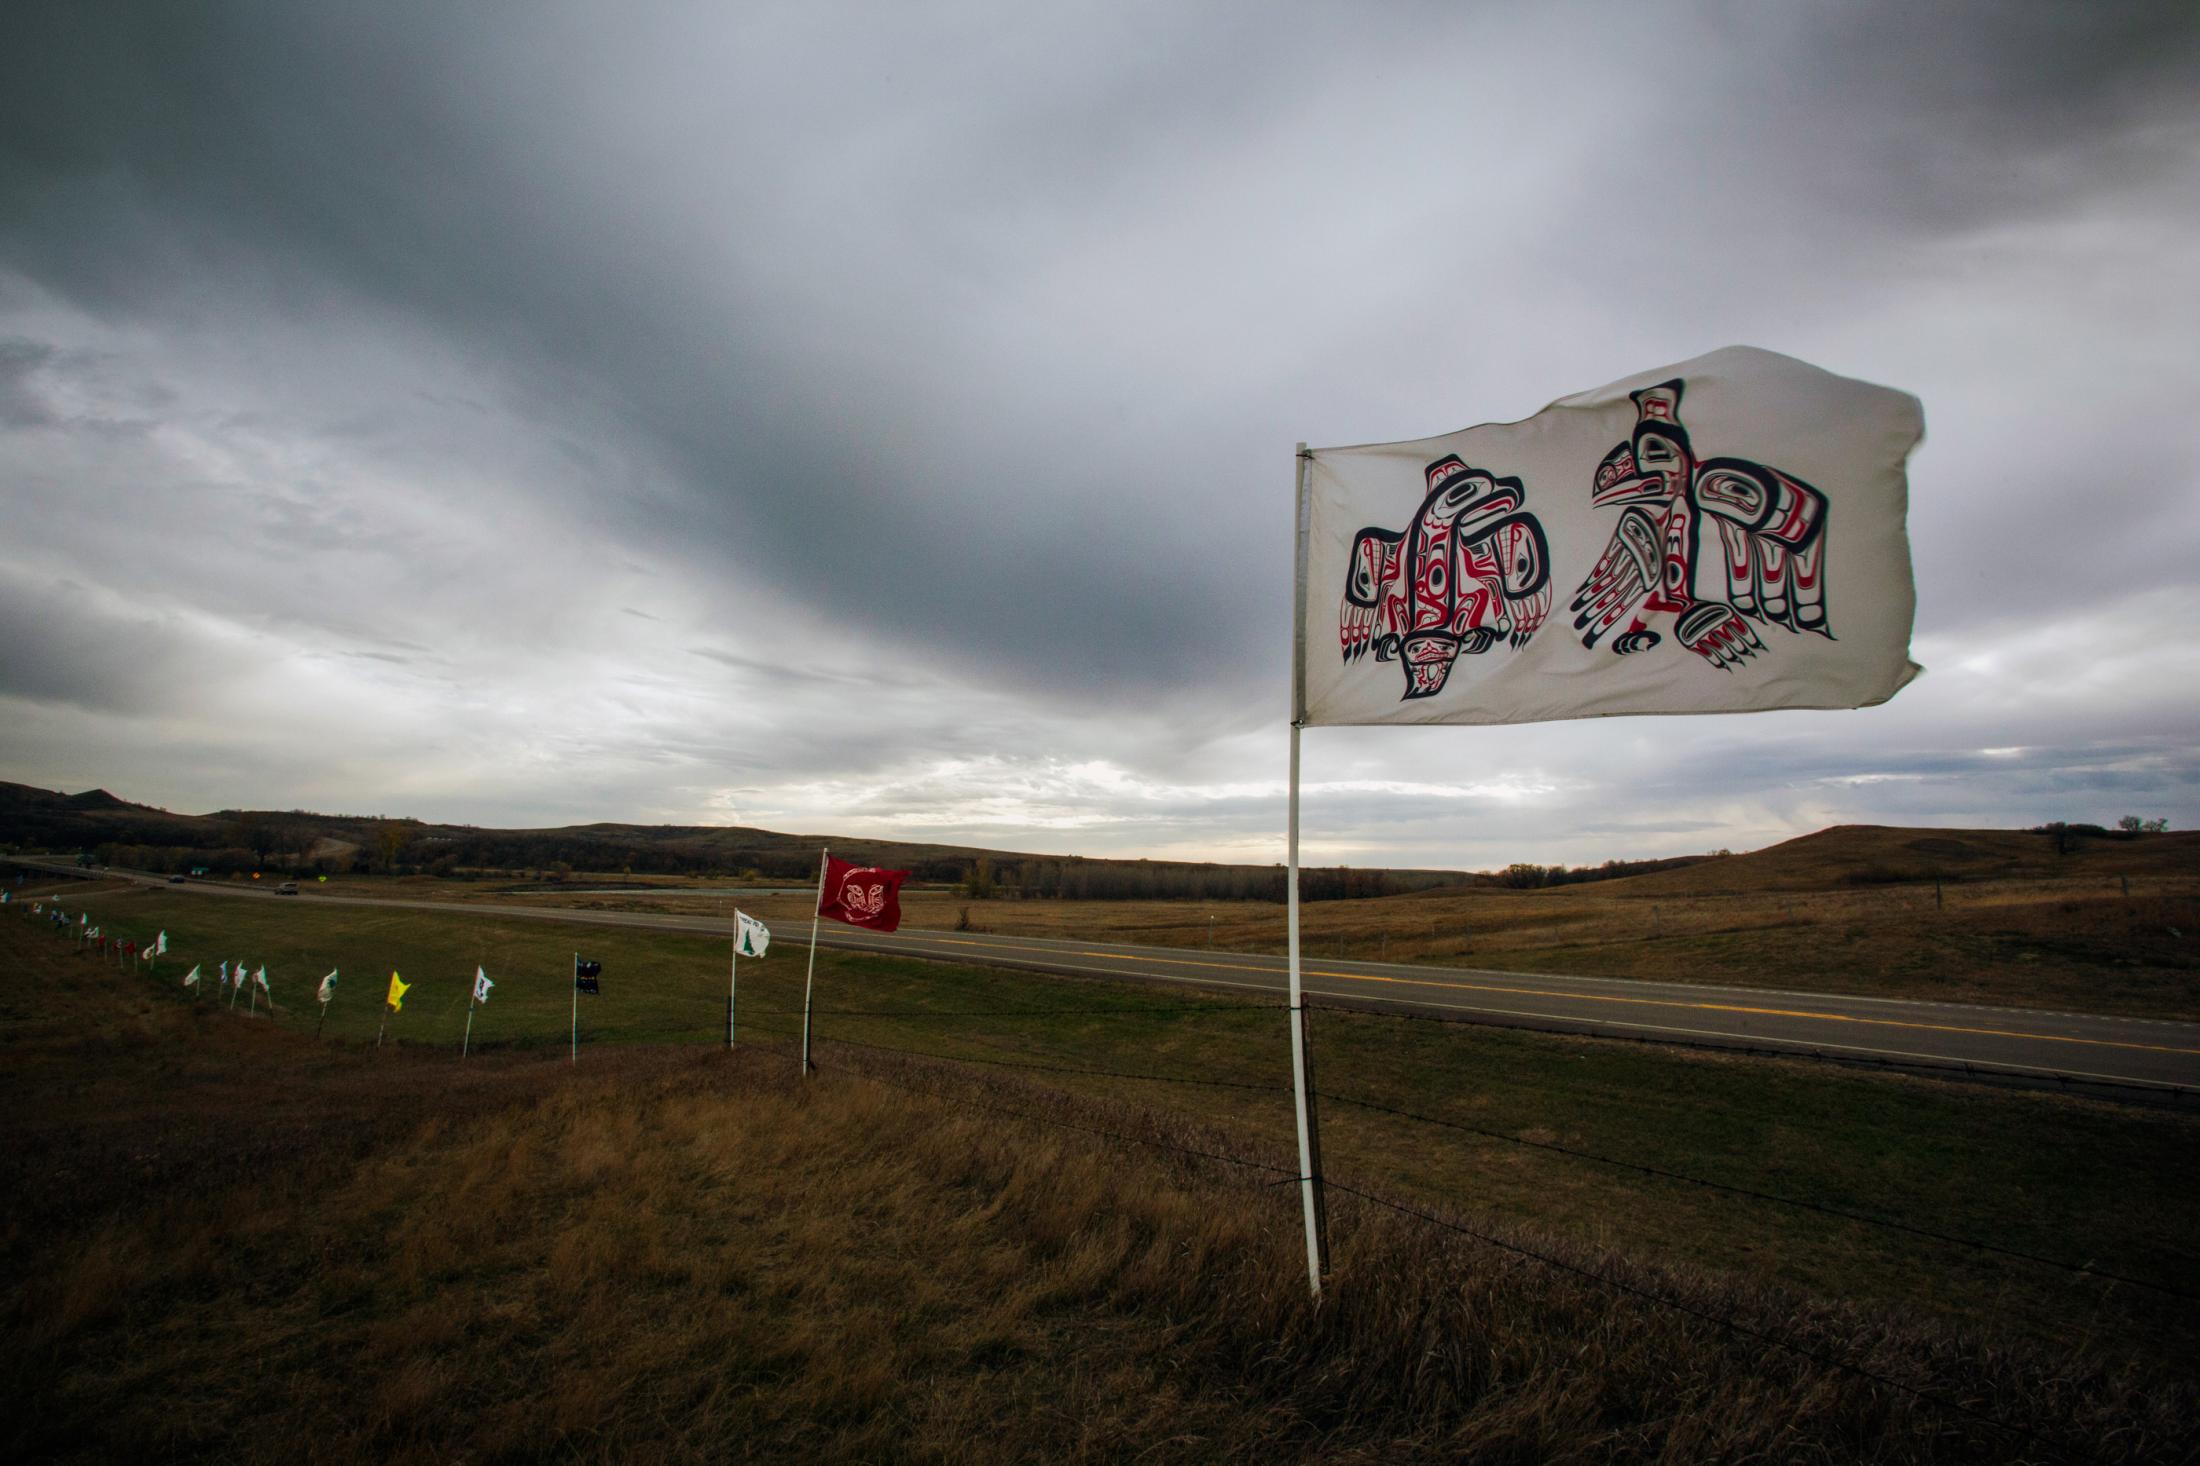 Over 300 tribal flags are posted around the Sacred Stone Camp in Cannon Ball, North Dakota. The flags represent each Indian nation that have visited the camp since its founding.